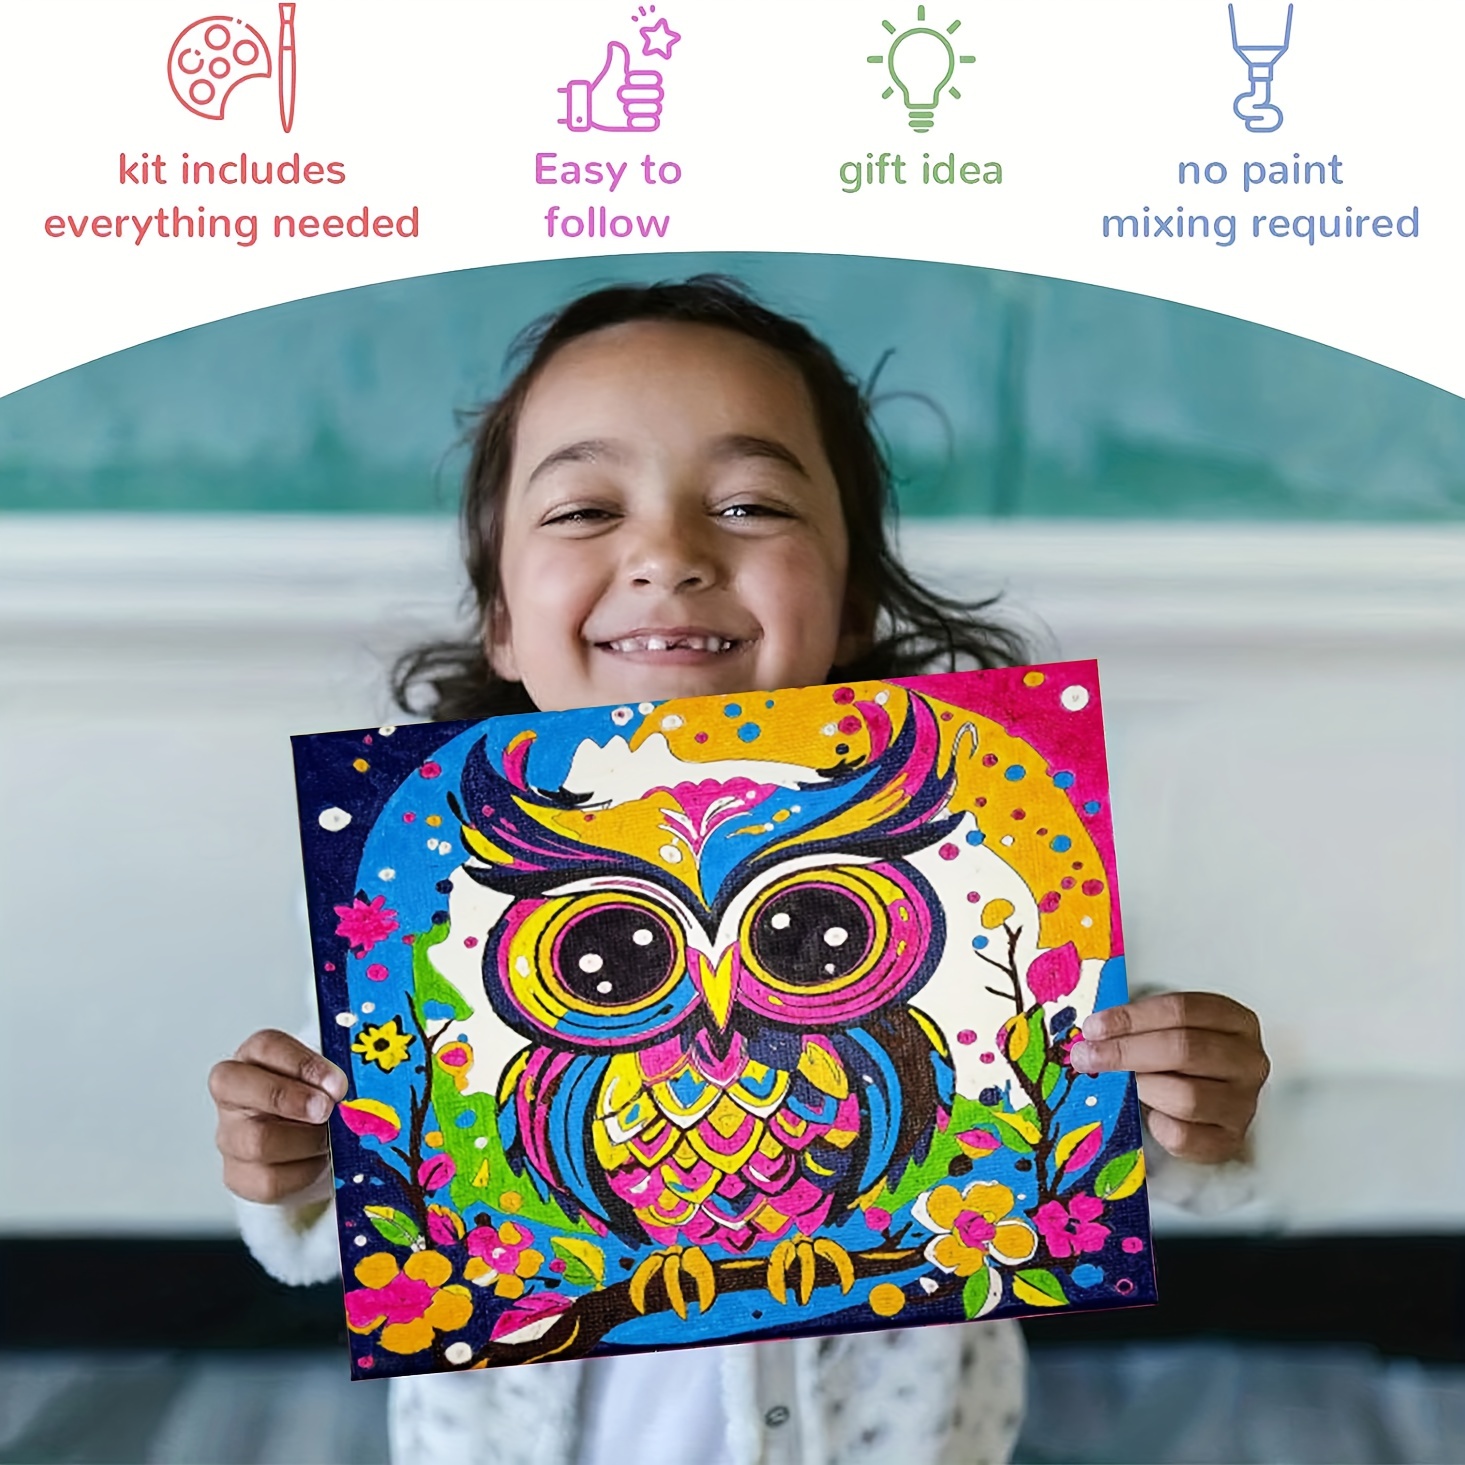 Buy Kids Canvas Painting Kit Pre Printed Canvas To Paint from